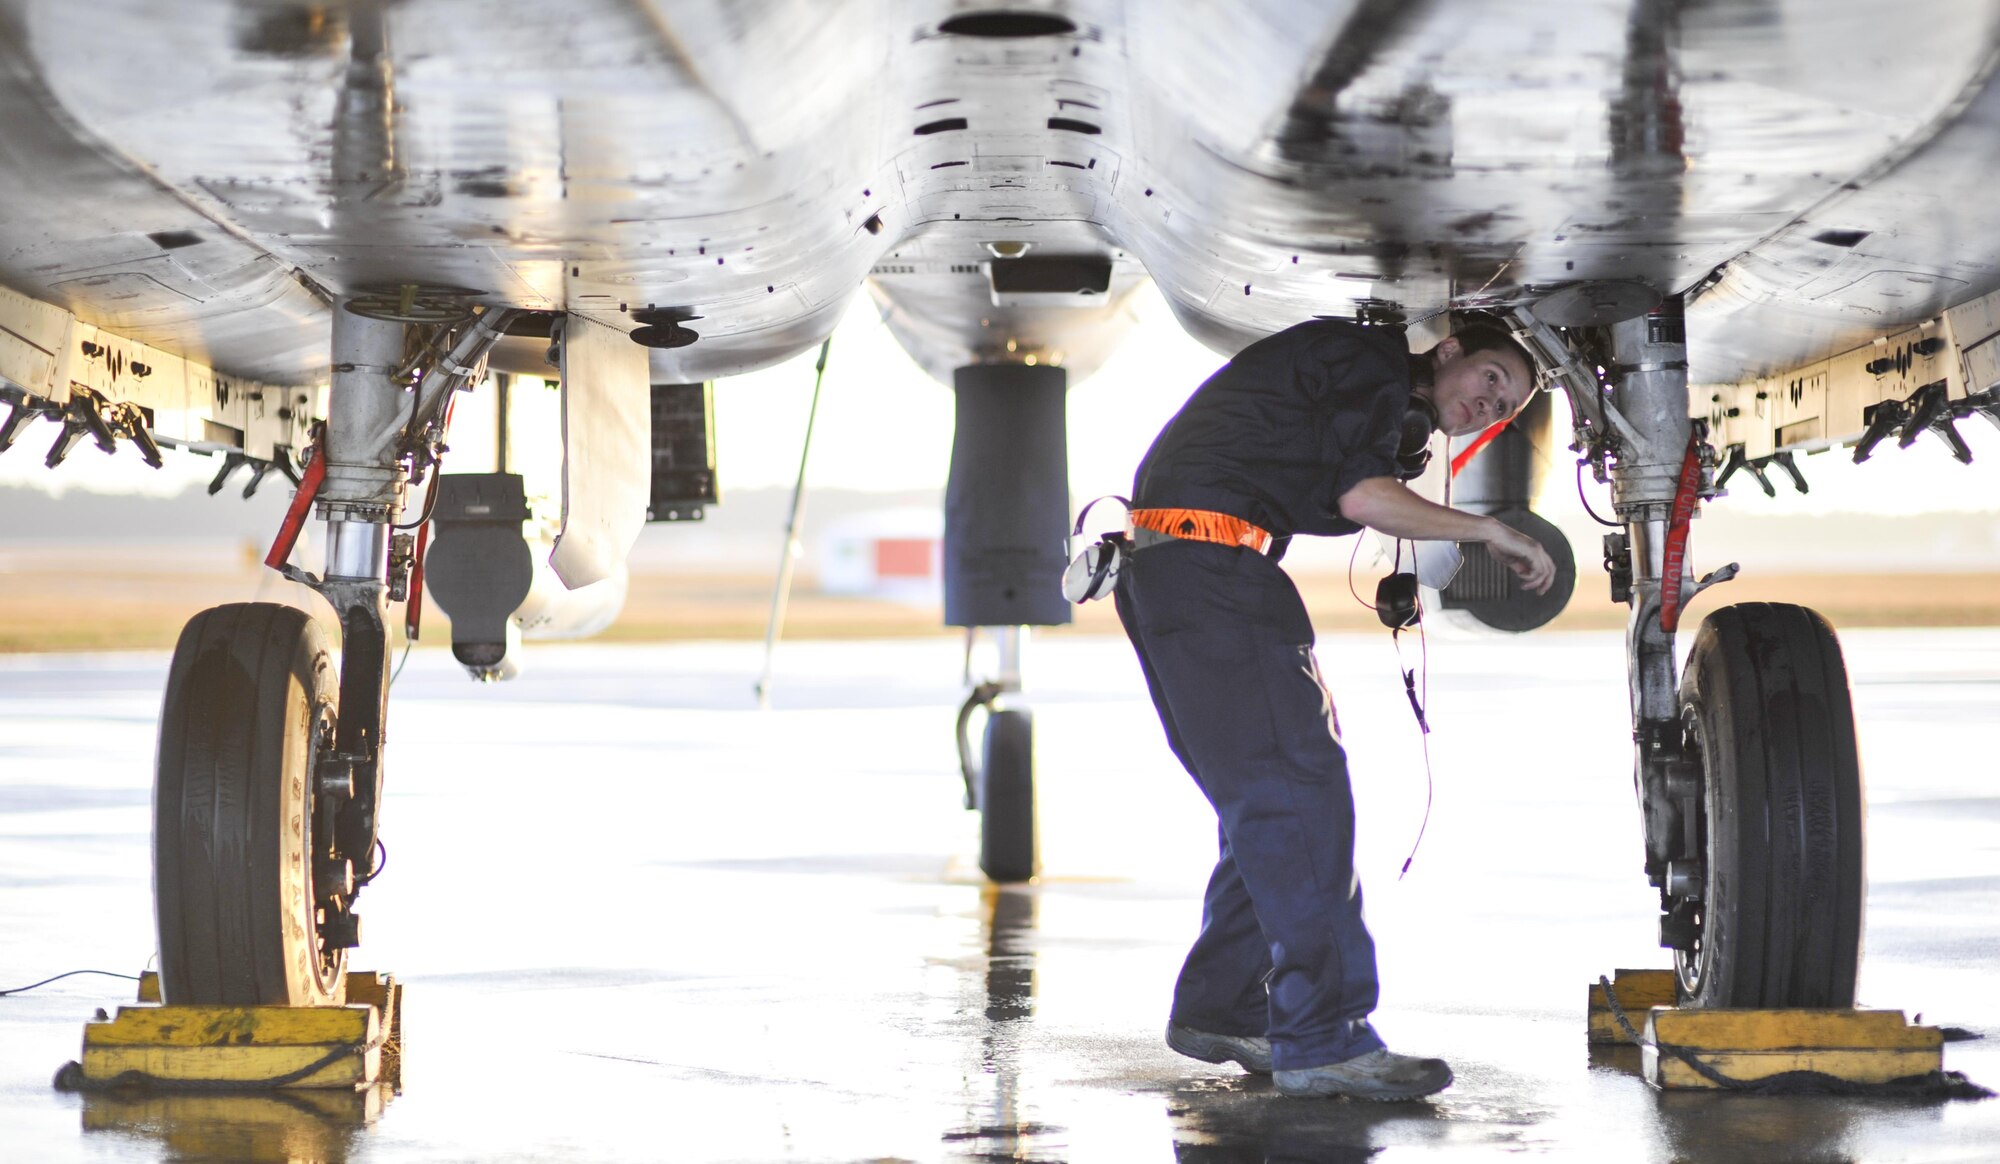 U.S. Air Force Airman 1st Class Morgan Cisna, an F-15E Strike Eagle crew chief with the 391st Aircraft Maintenance Squadron, Mountain Home Air Force Base, Idaho, inspects the underside of an F-15E before takeoff at Tyndall AFB, Fla., Dec. 5, 2016. The F-15Es are taking part in Checkered Flag 17-1, a large scale total force integration exercise that gives legacy and fifth-generation aircraft a chance to train together in a simulated deployed environment. (U.S. Air Force photo by Senior Airman Dustin Mullen/Released)